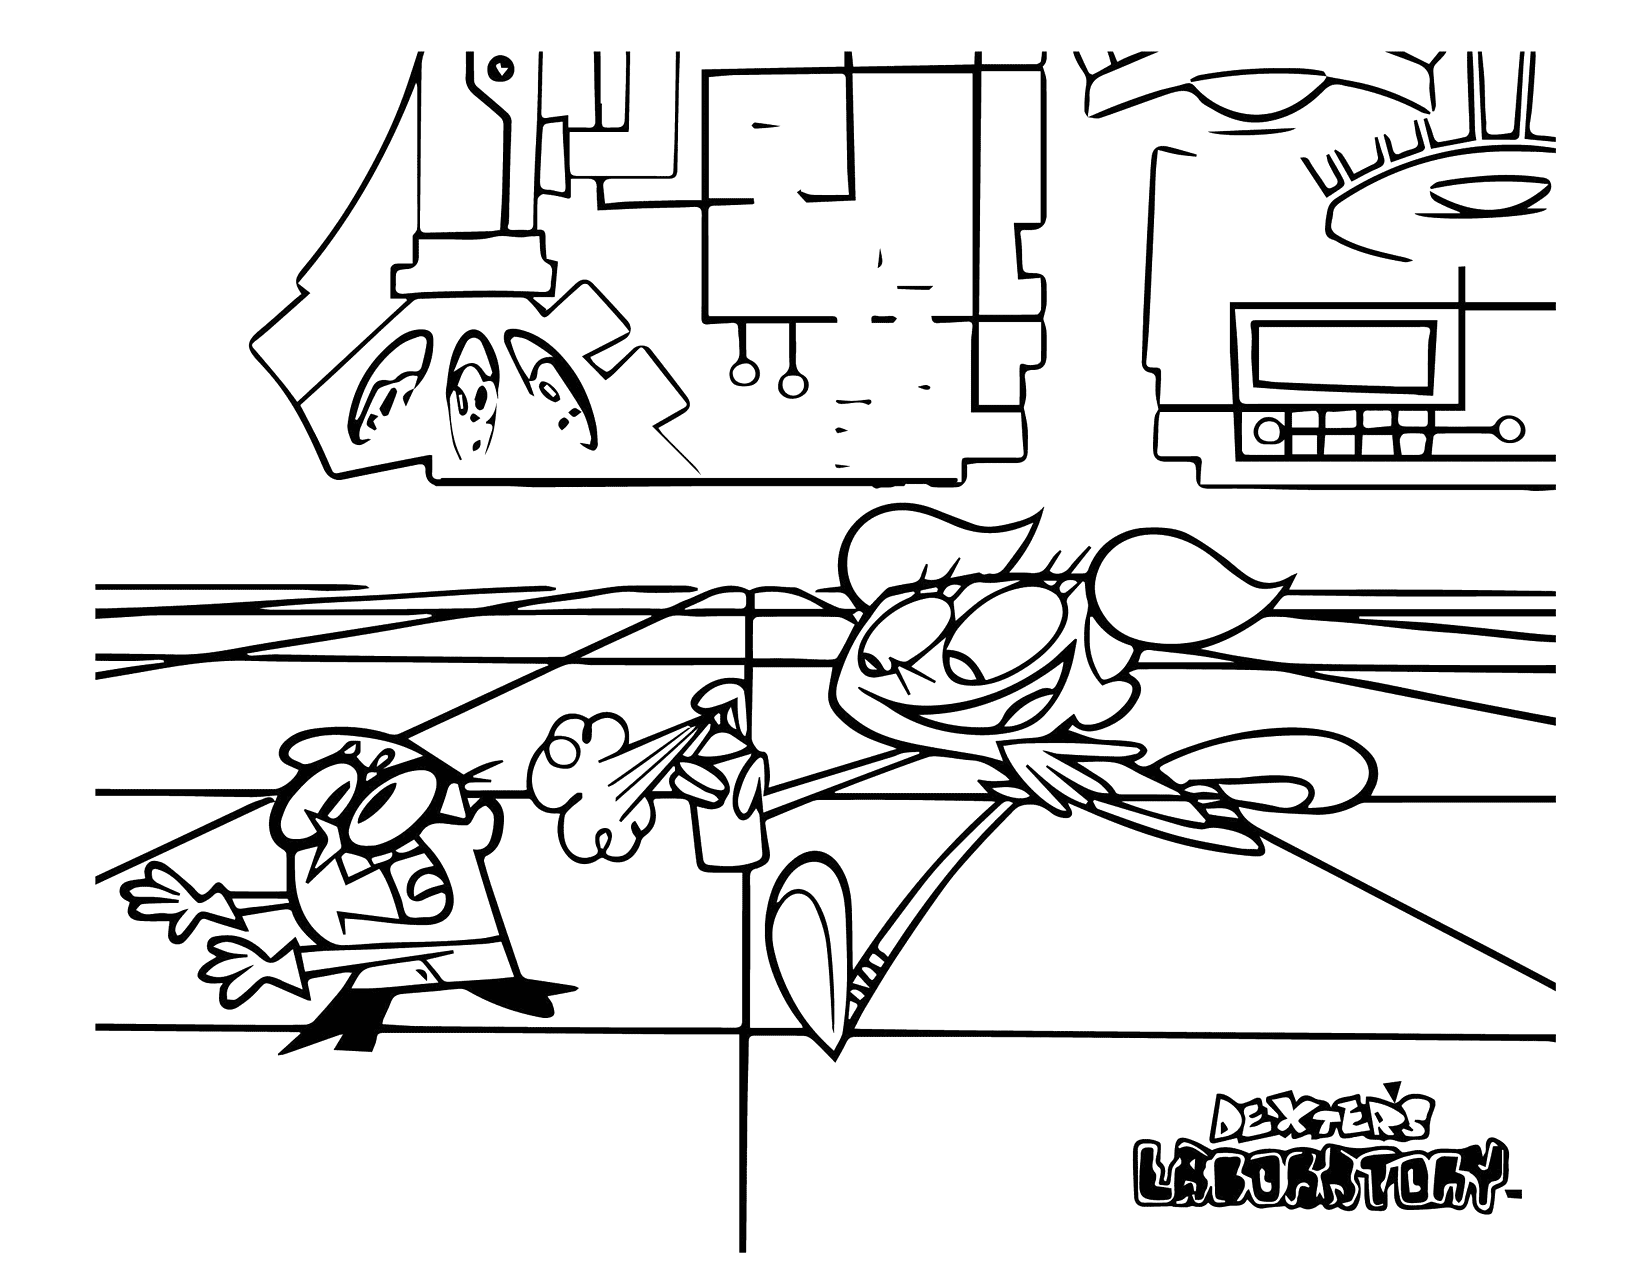 Dee Dee Chasing Dexter Coloring Page